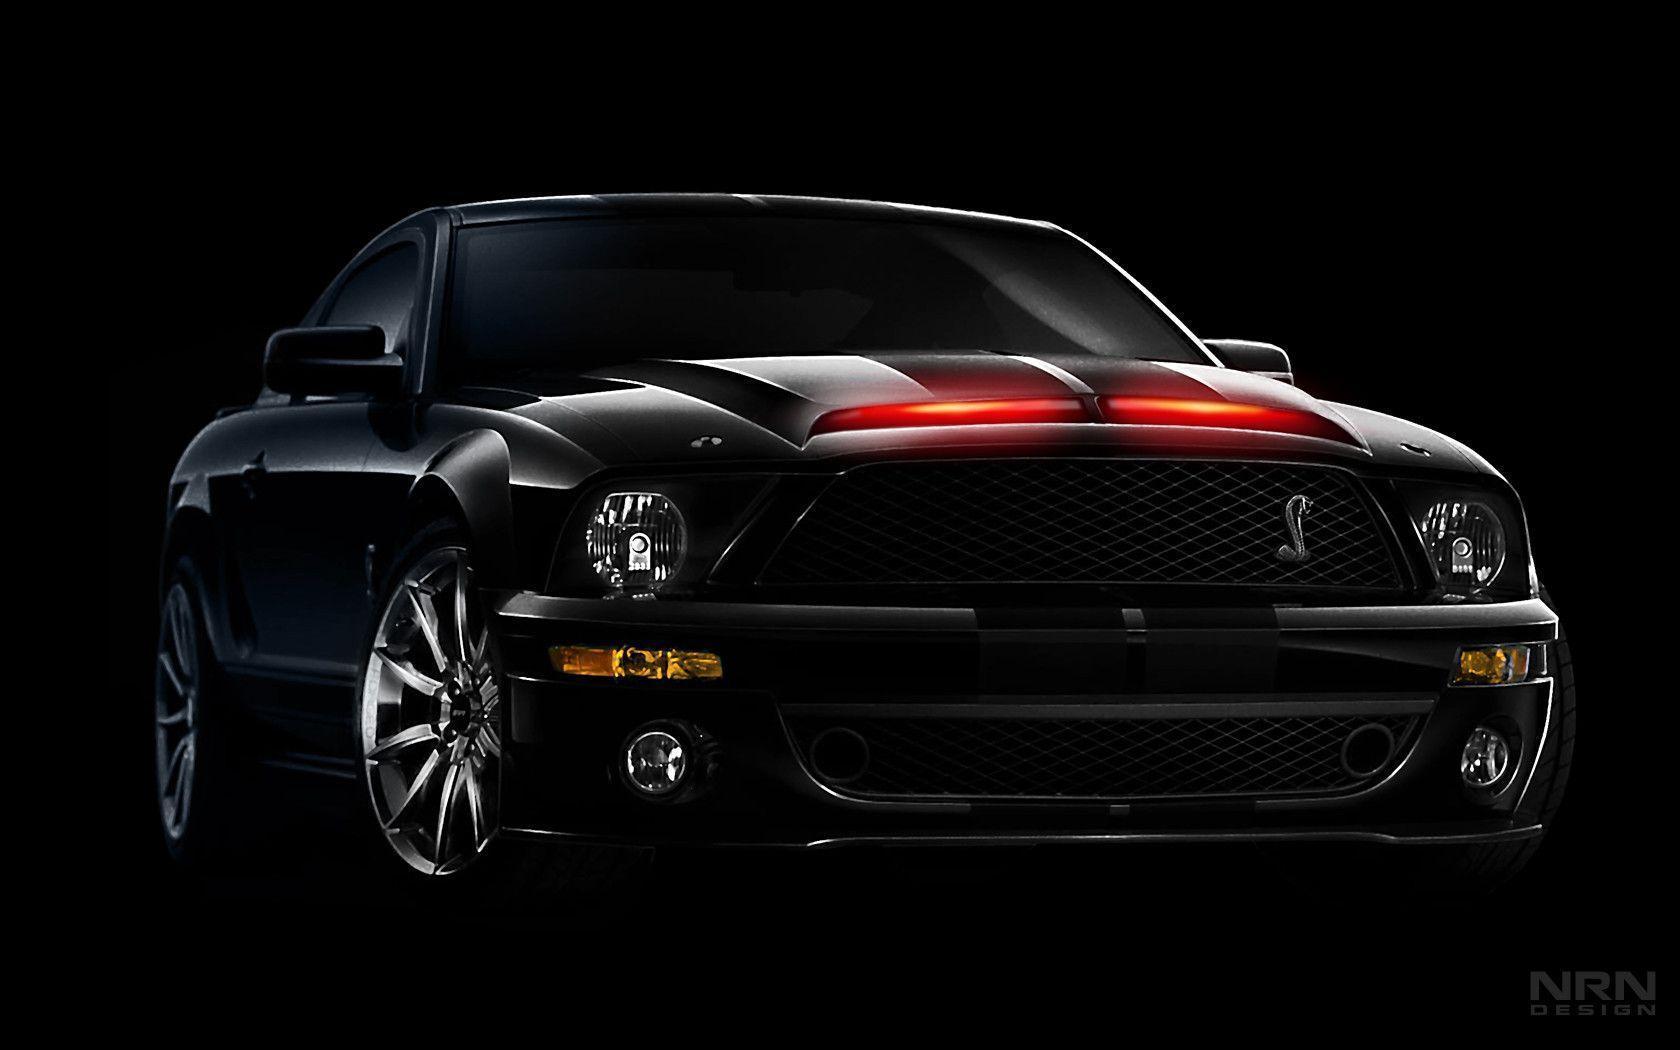 Ford Mustang Knight Rider Wallpapers ~ Download Wallpapers Cars